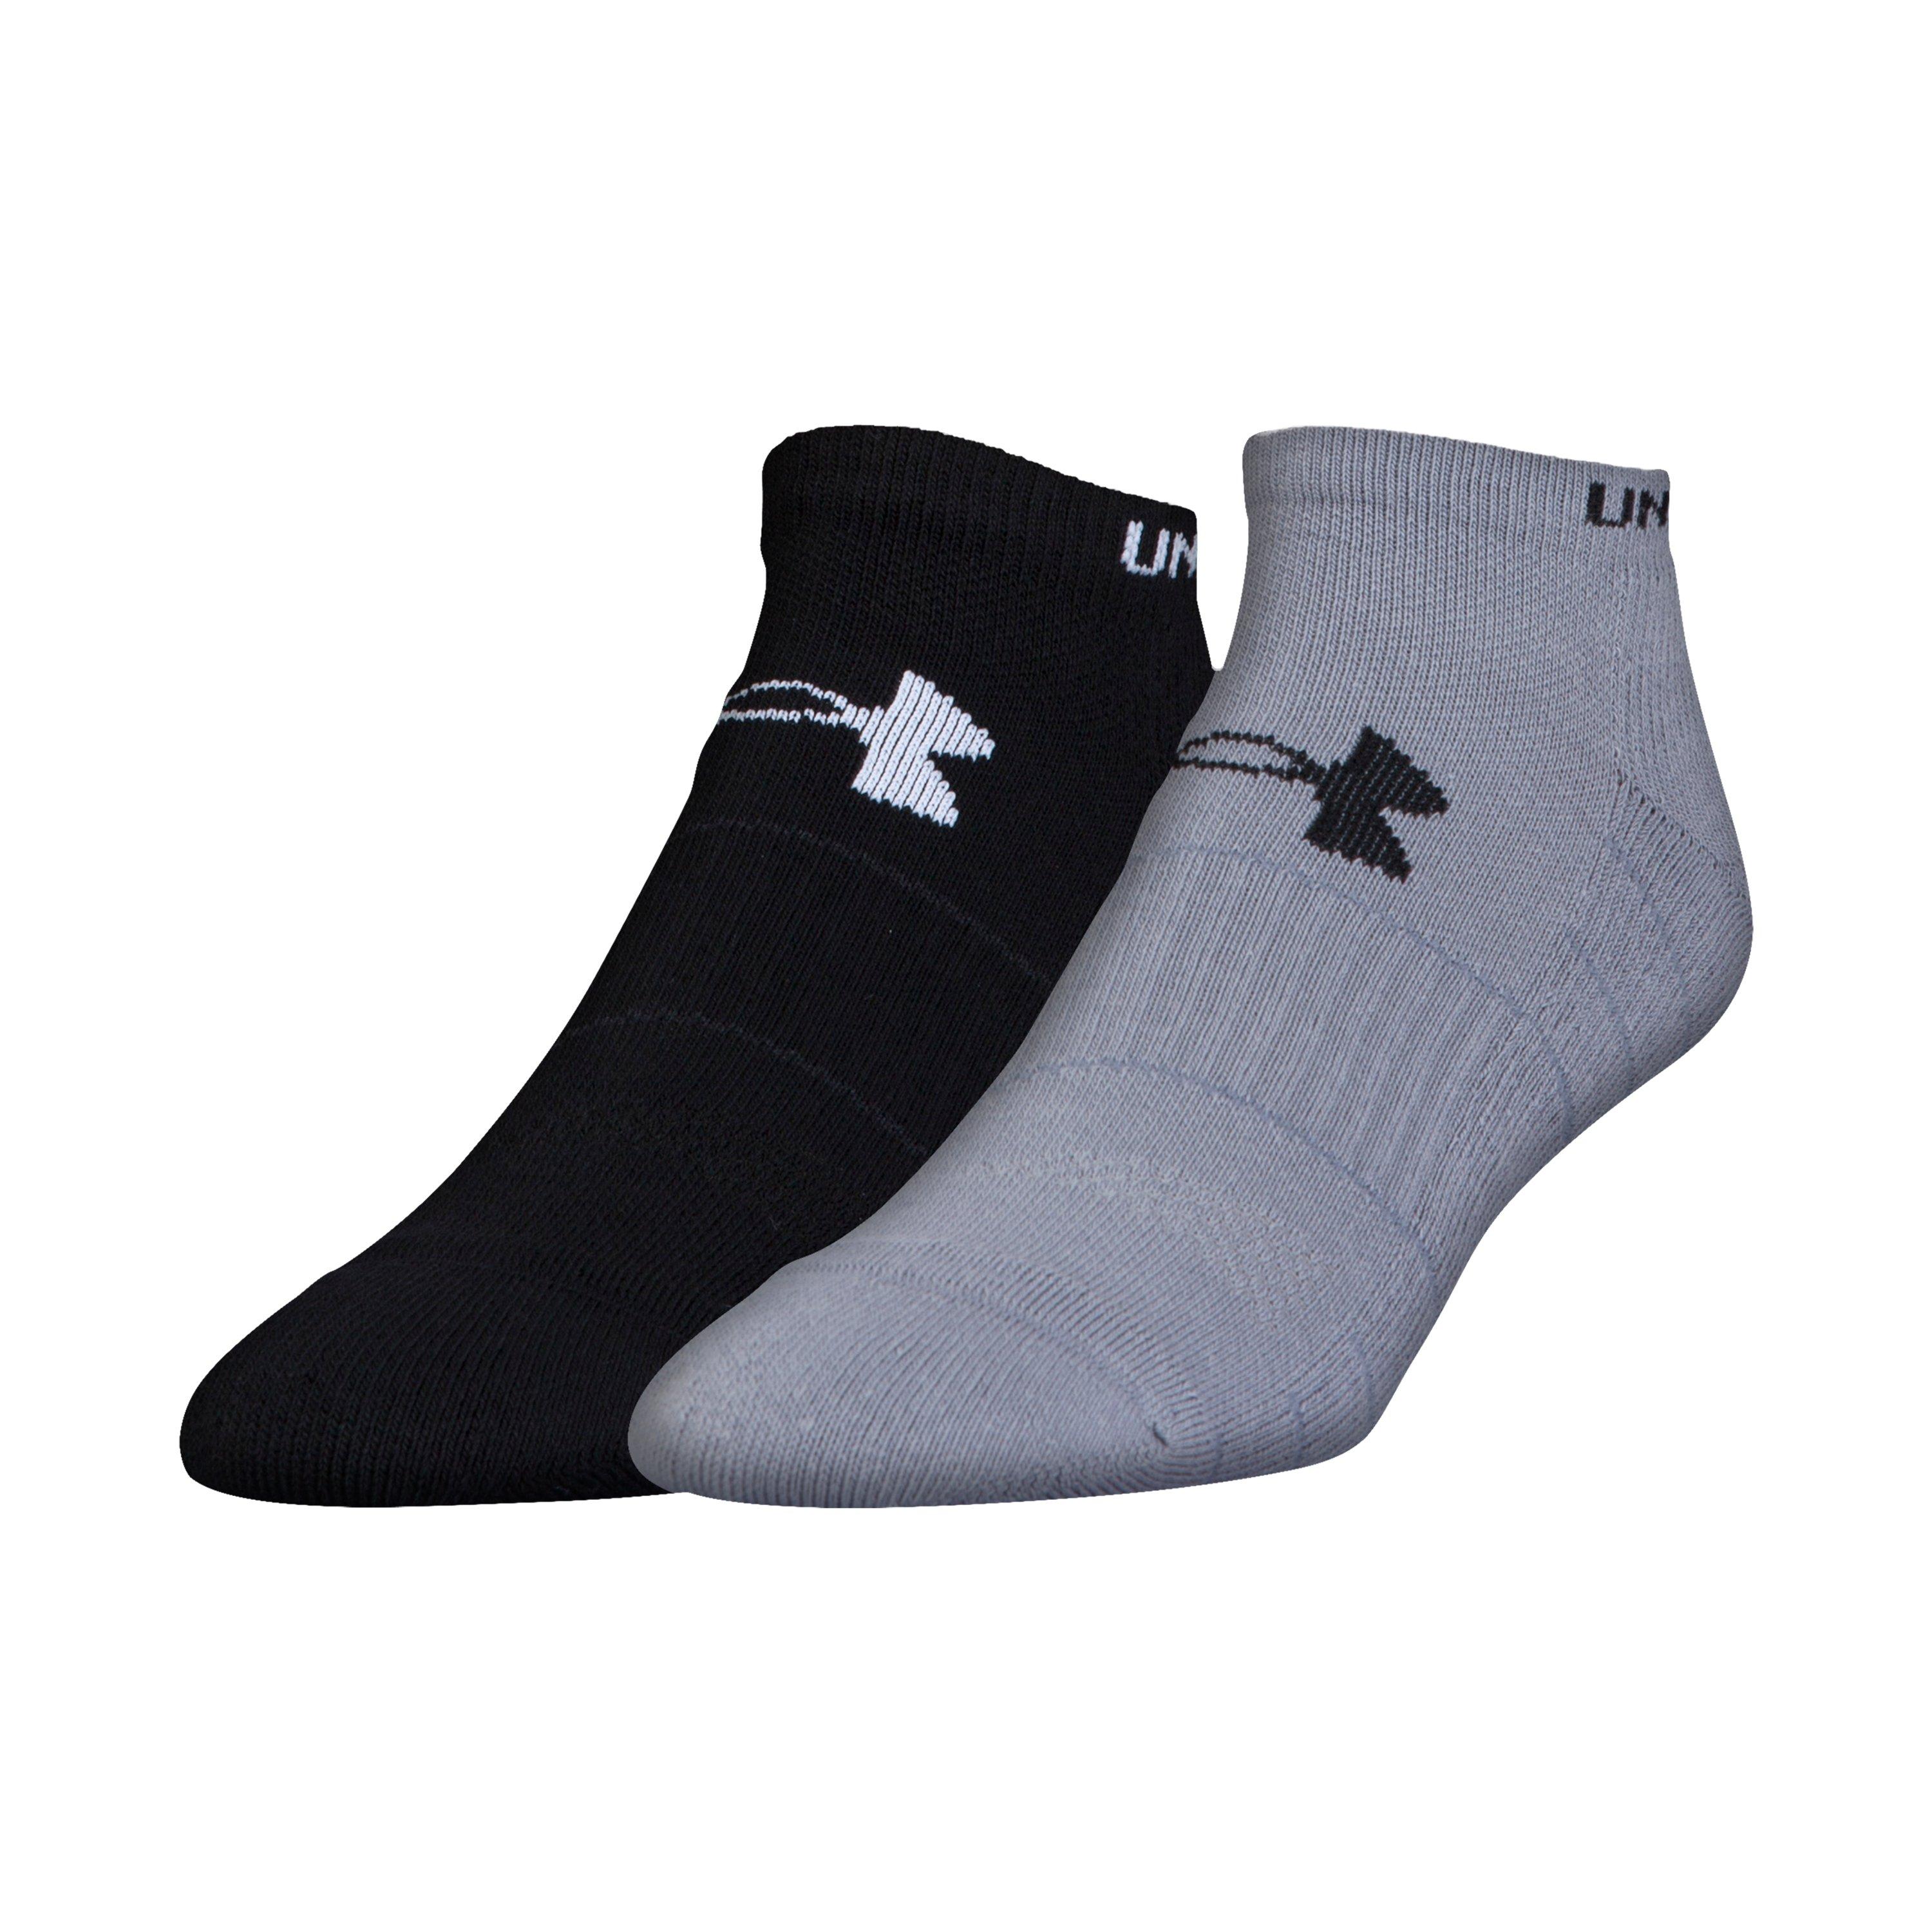 Lyst - Under armour Men's Ua Golf Elevated Performance Now Show Socks ...